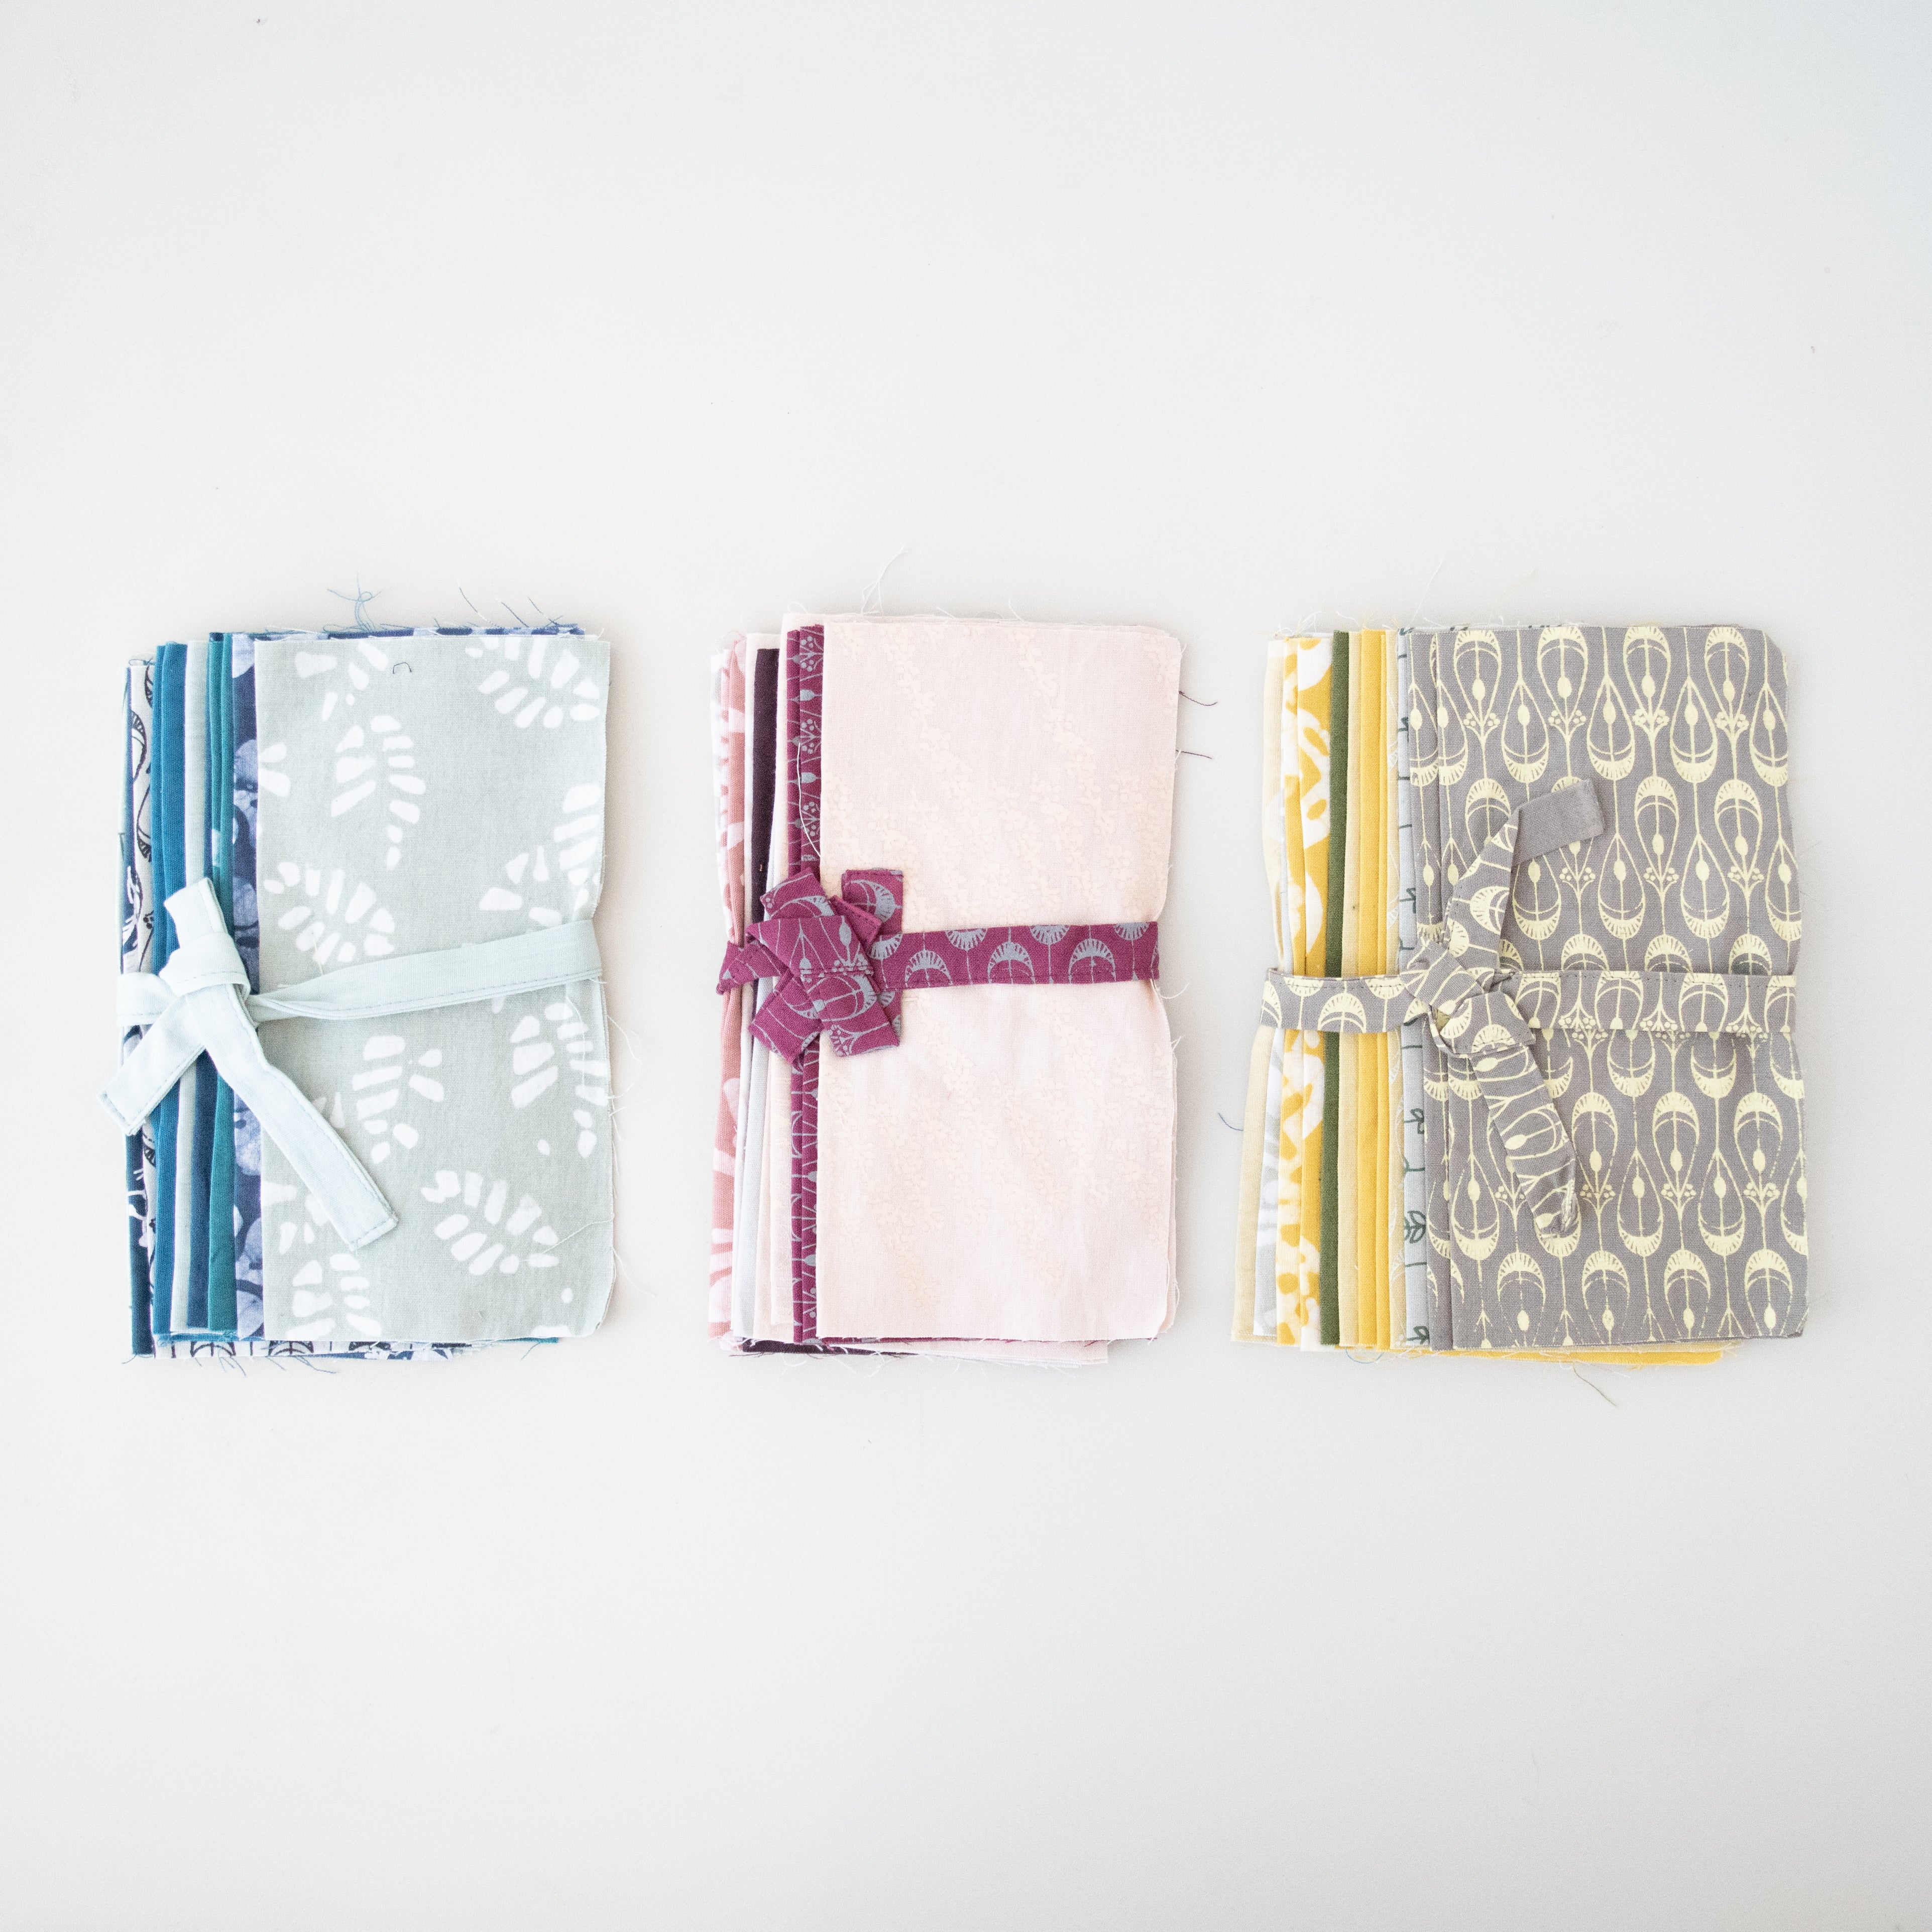 Quilting Squares - Kenyan materials and design for a fair trade boutique